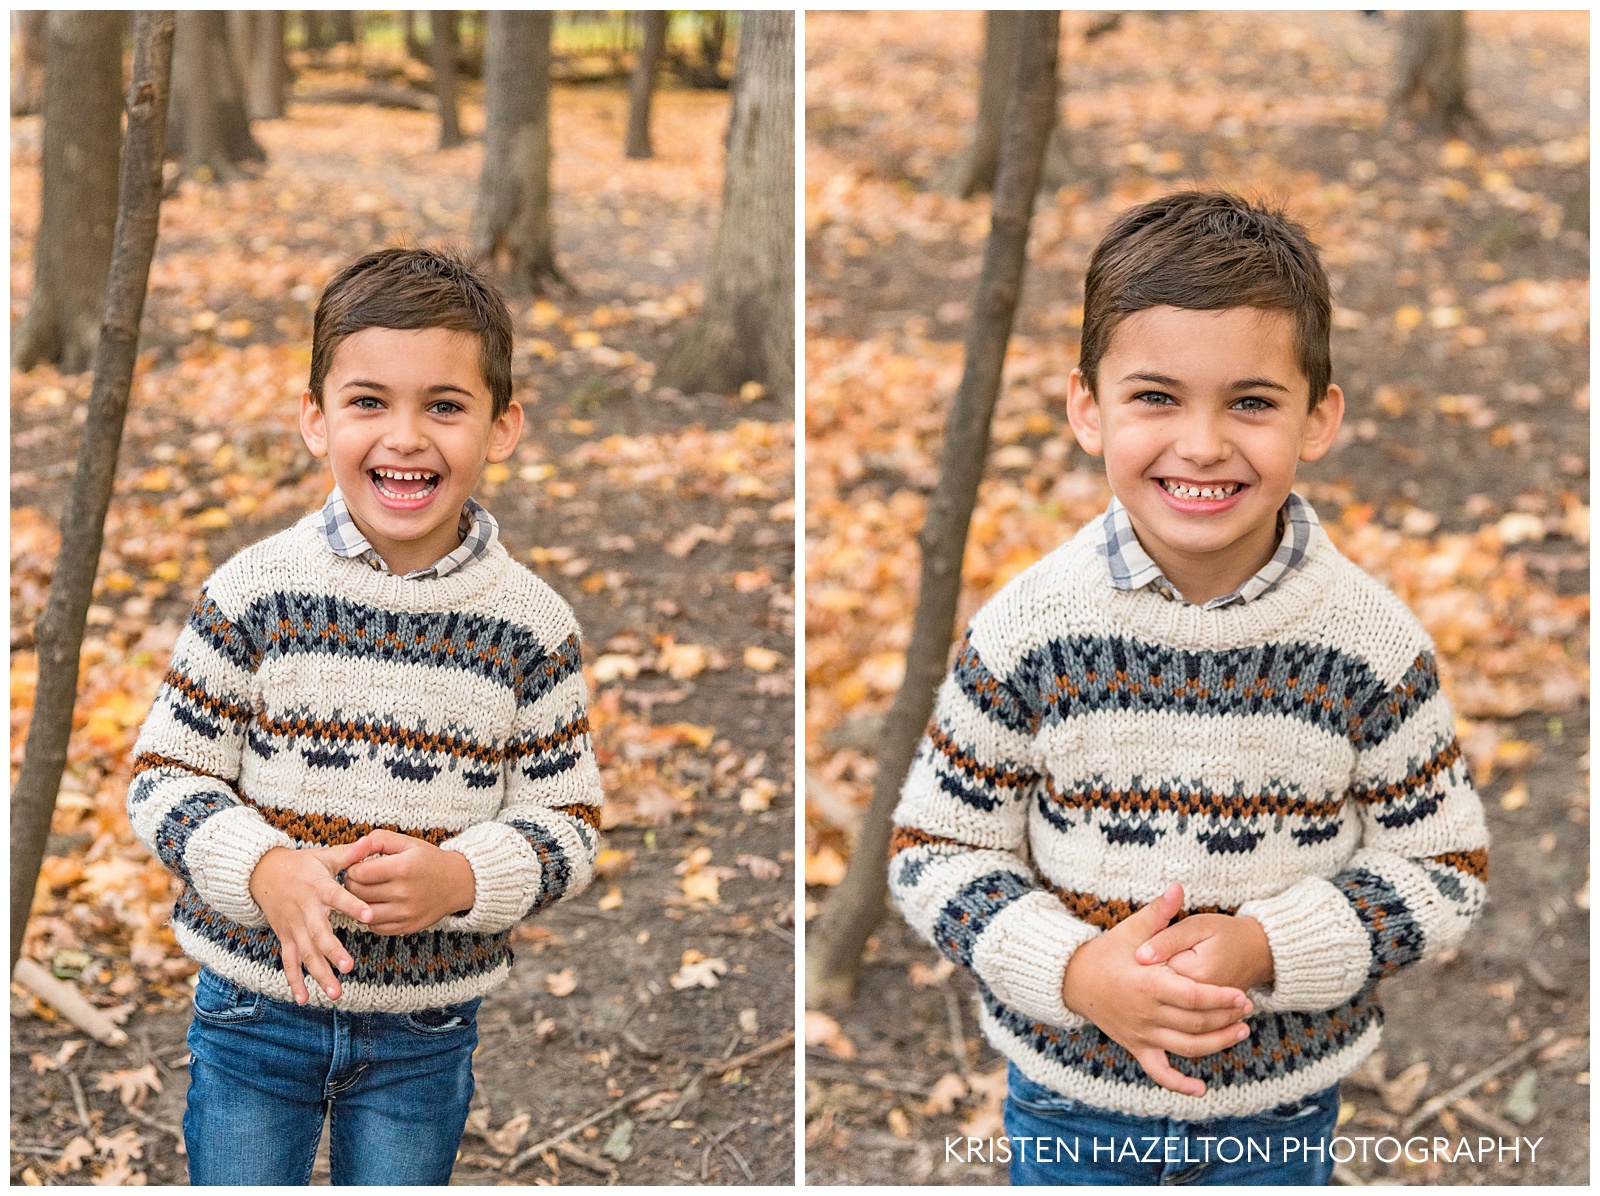 Portraits of a cheerful five year old boy